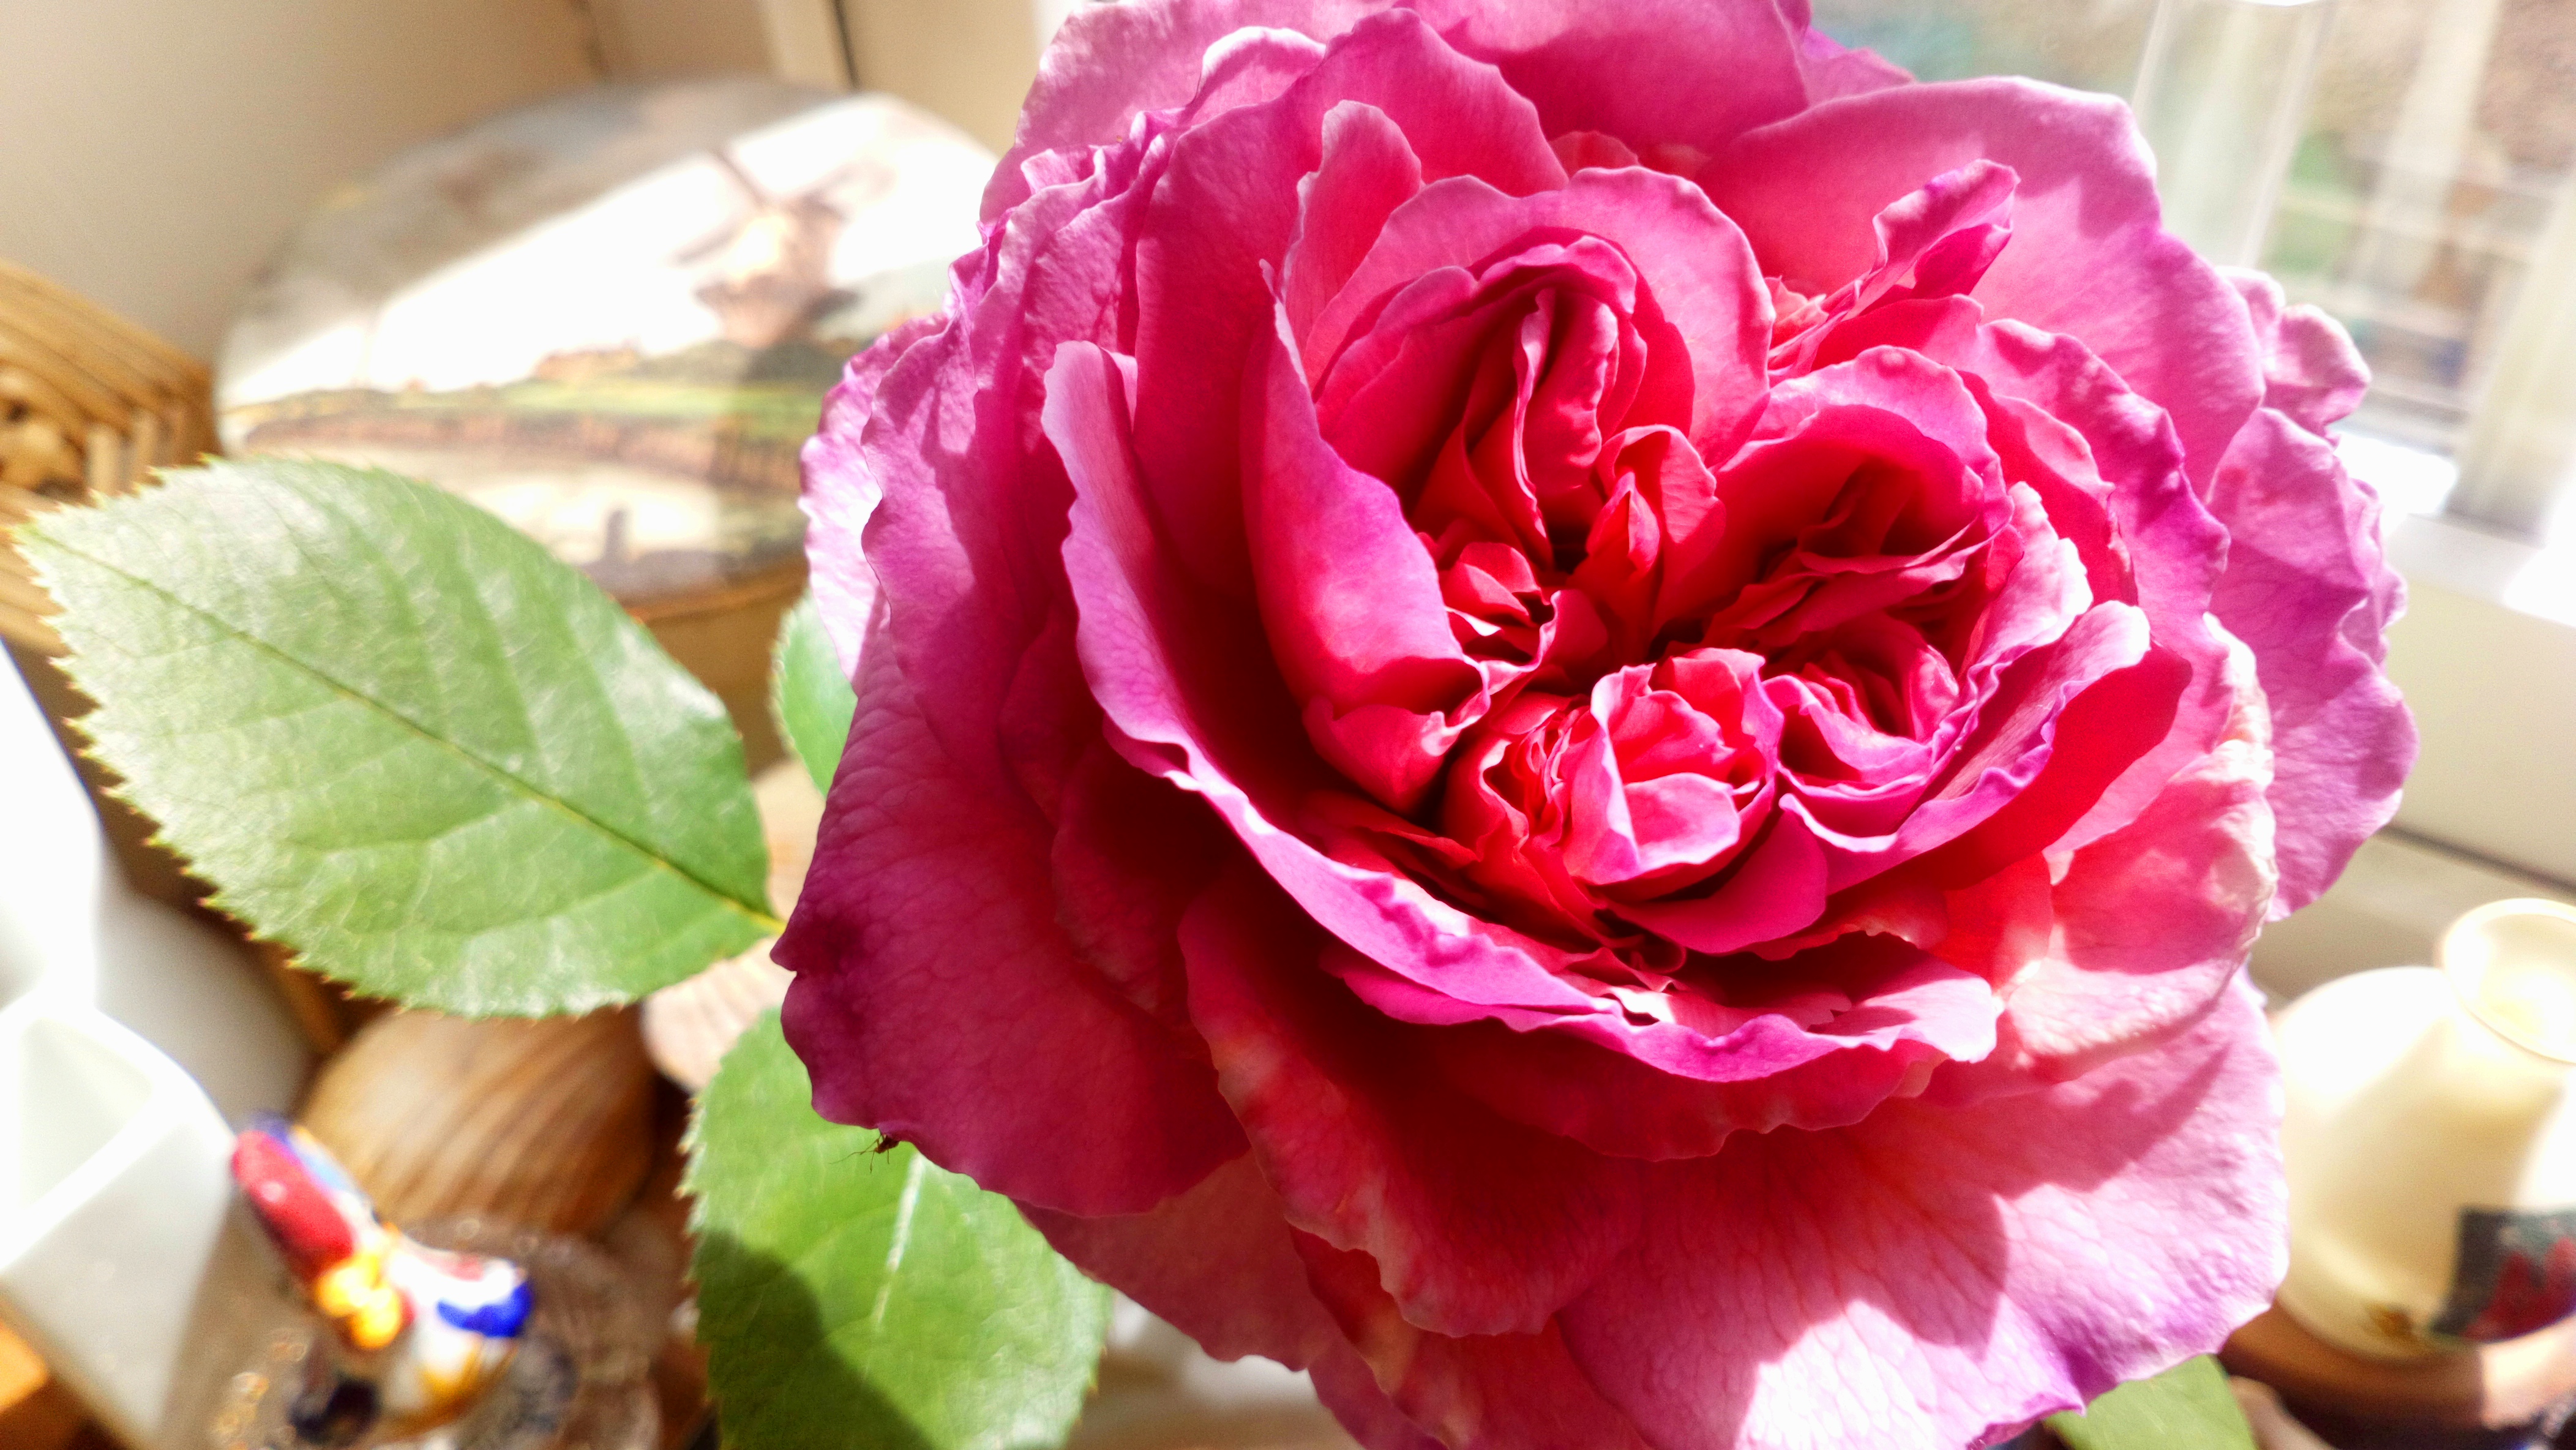 My French rose, by Andrea Connolly 